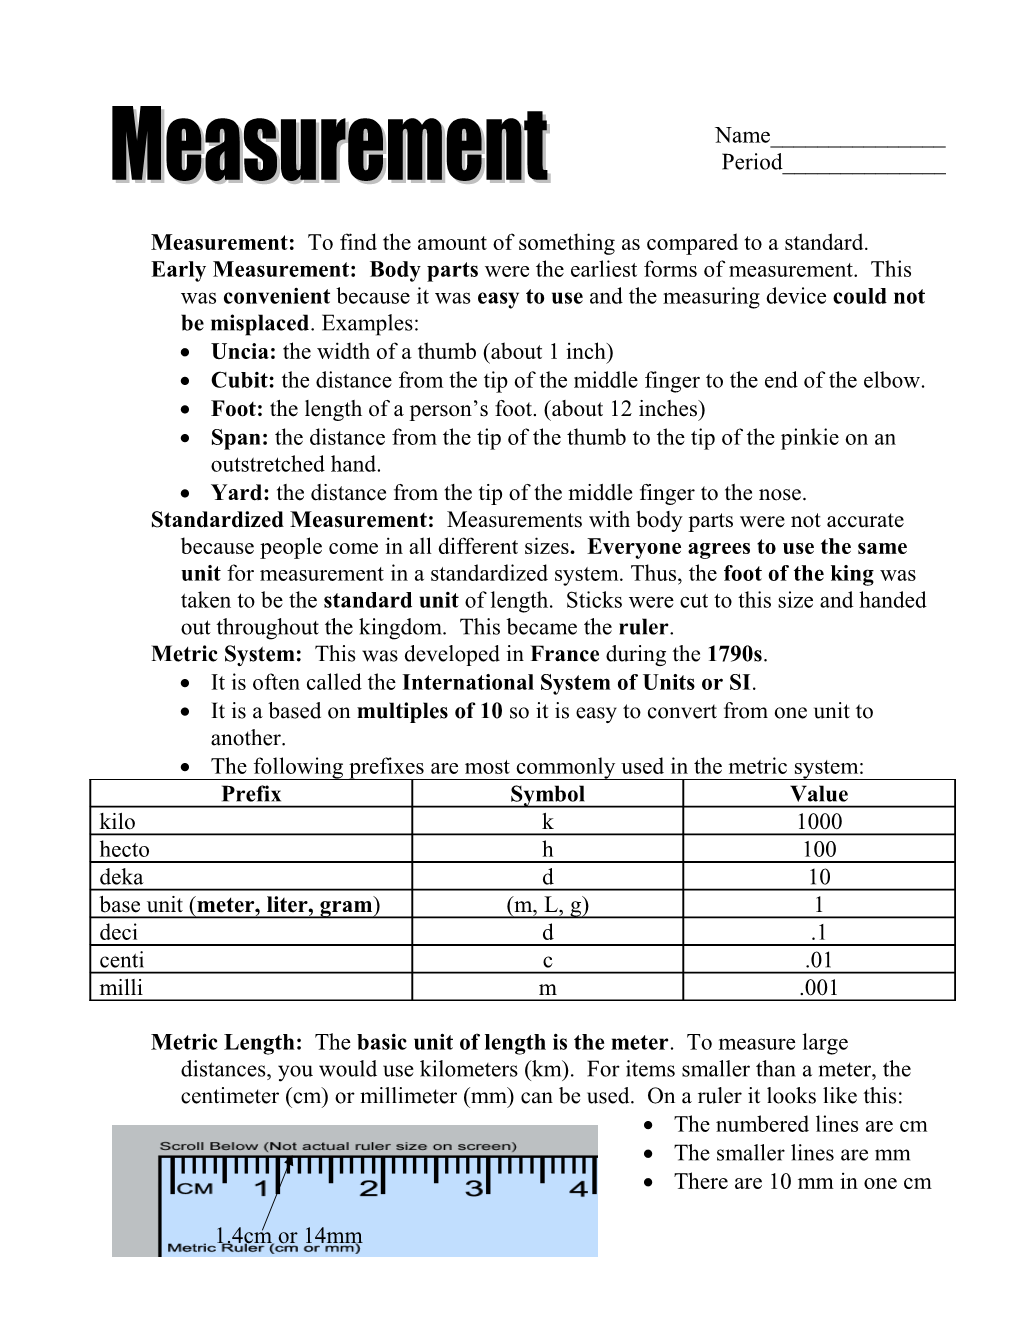 Measurement: to Find the Amount of Something As Compared to a Standard